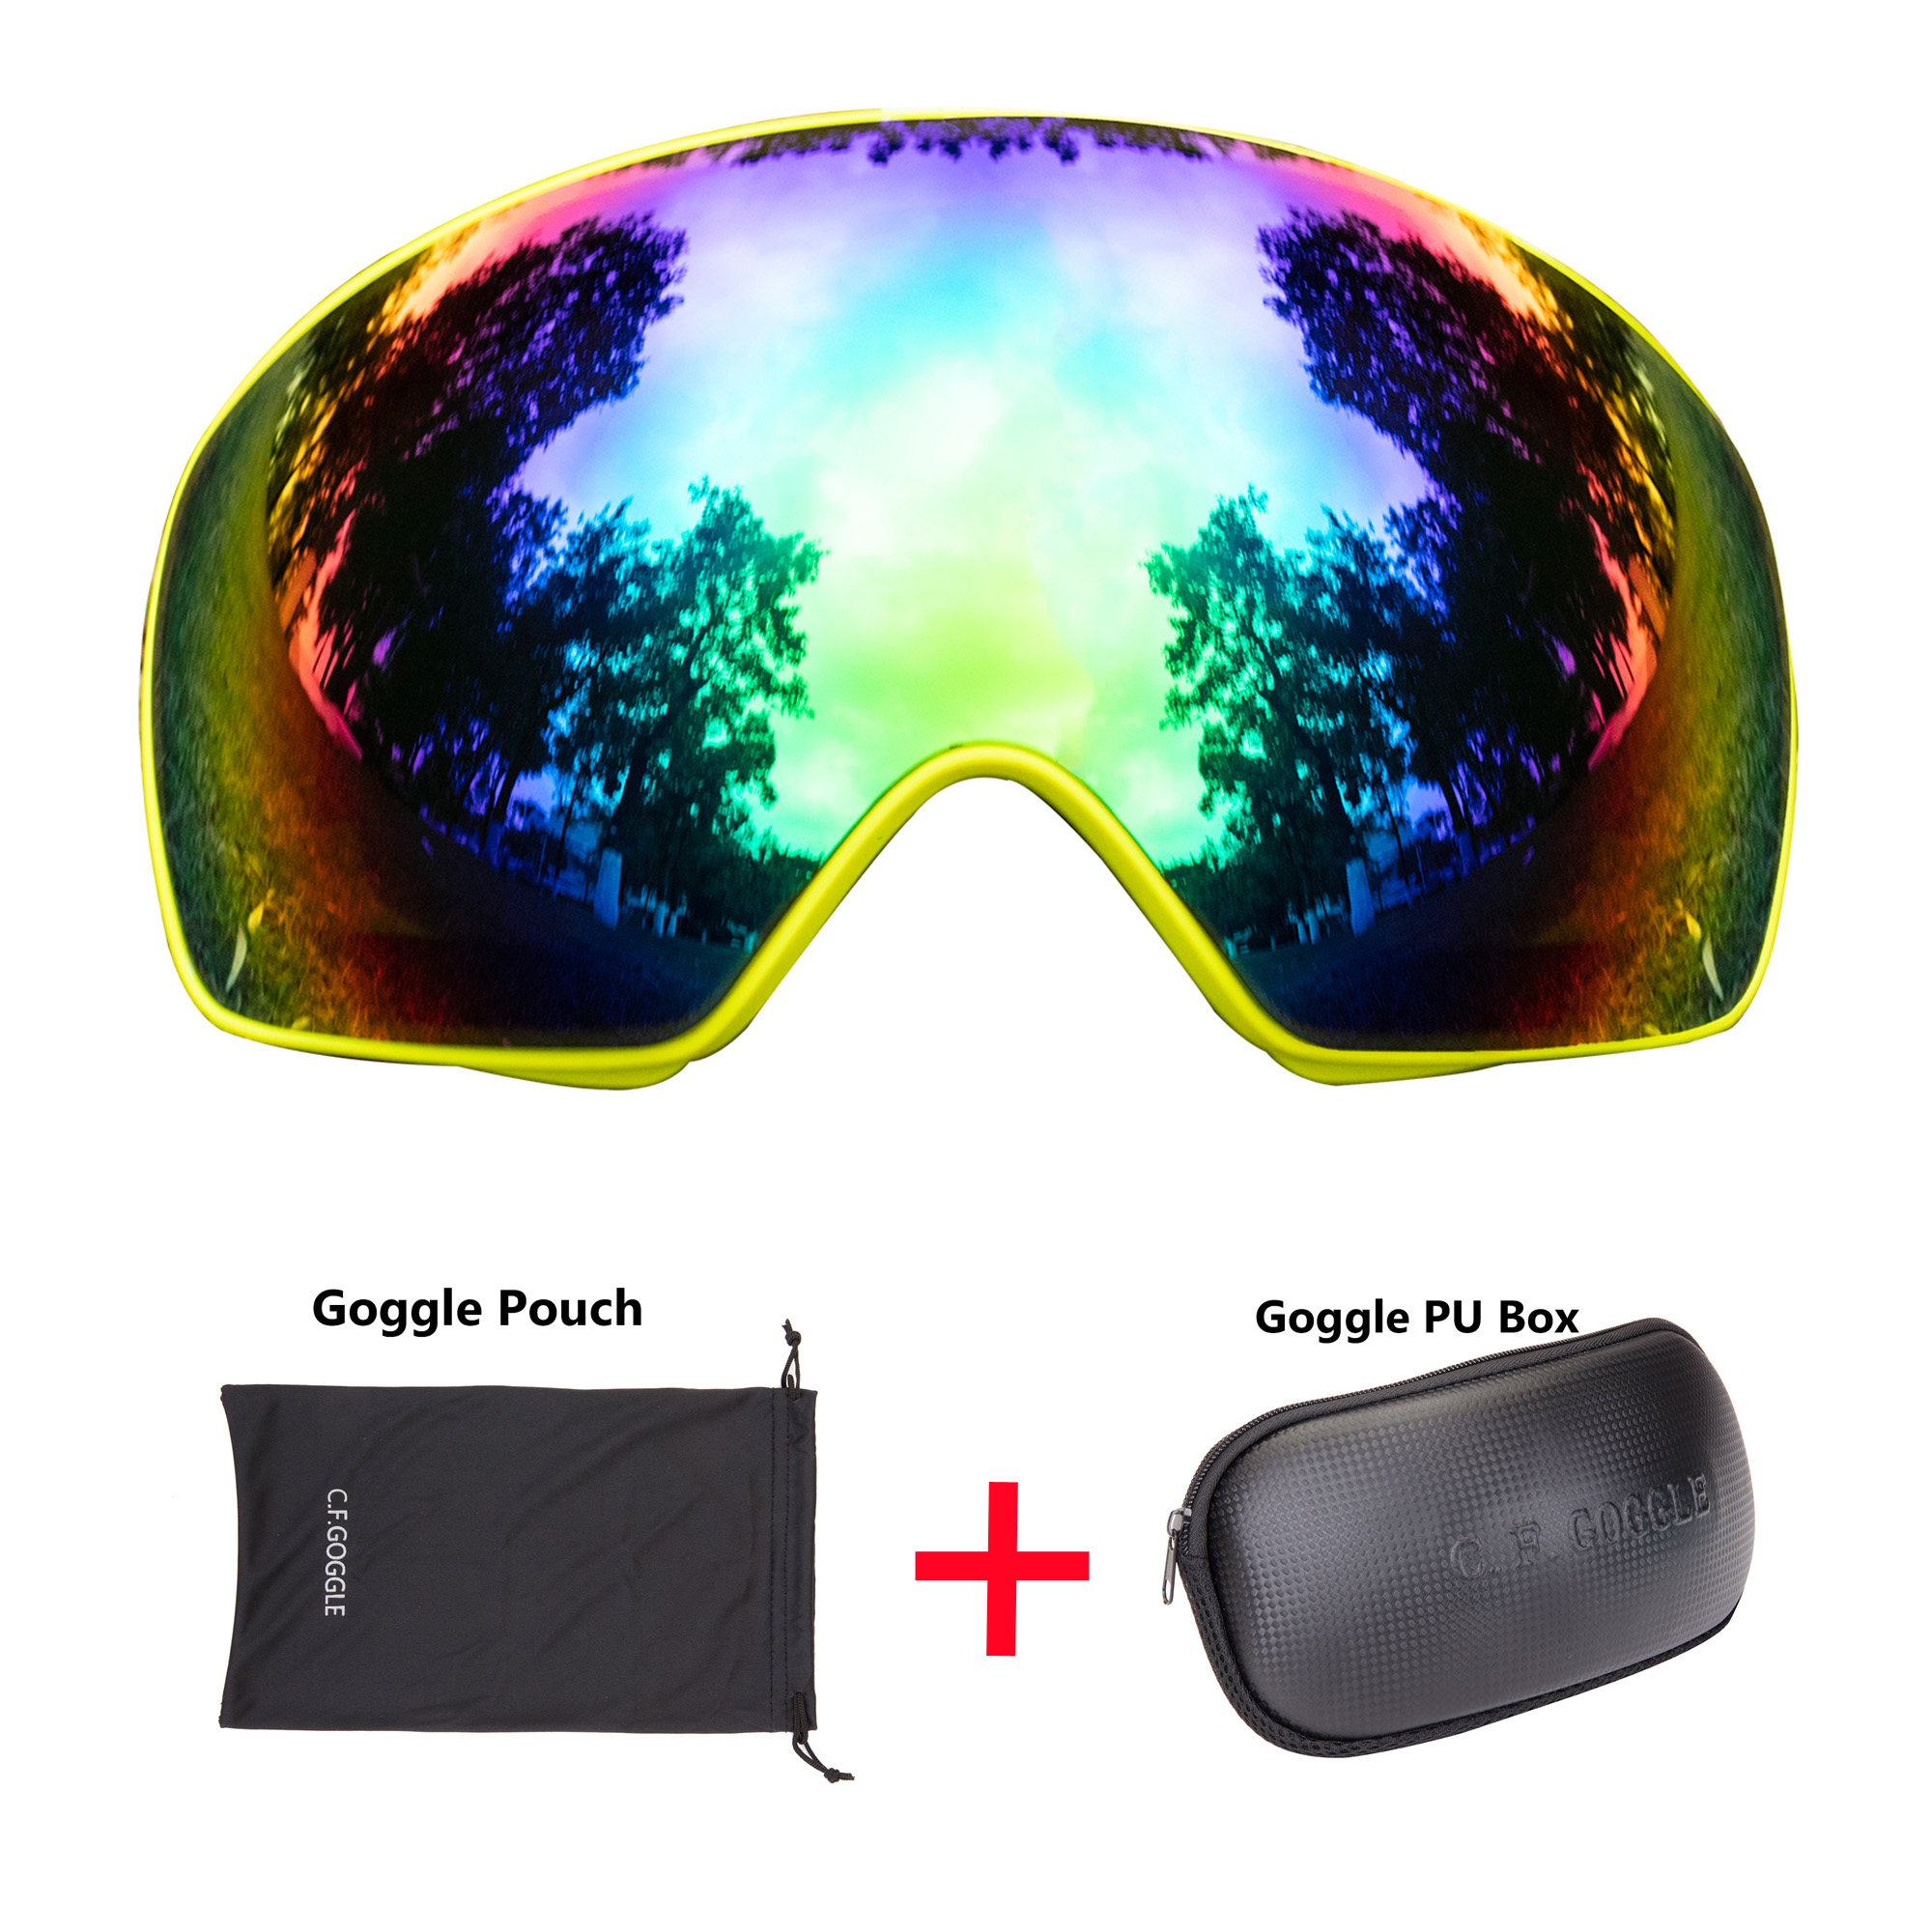 LELINTA Womens Skis, Snowboards & Accessories Goggles, for Skiing, Snowboarding, Motorcycling and Winter Sports - Anti-Fog and Helmet Compatible - OTG UV400 Protection - image 1 of 8